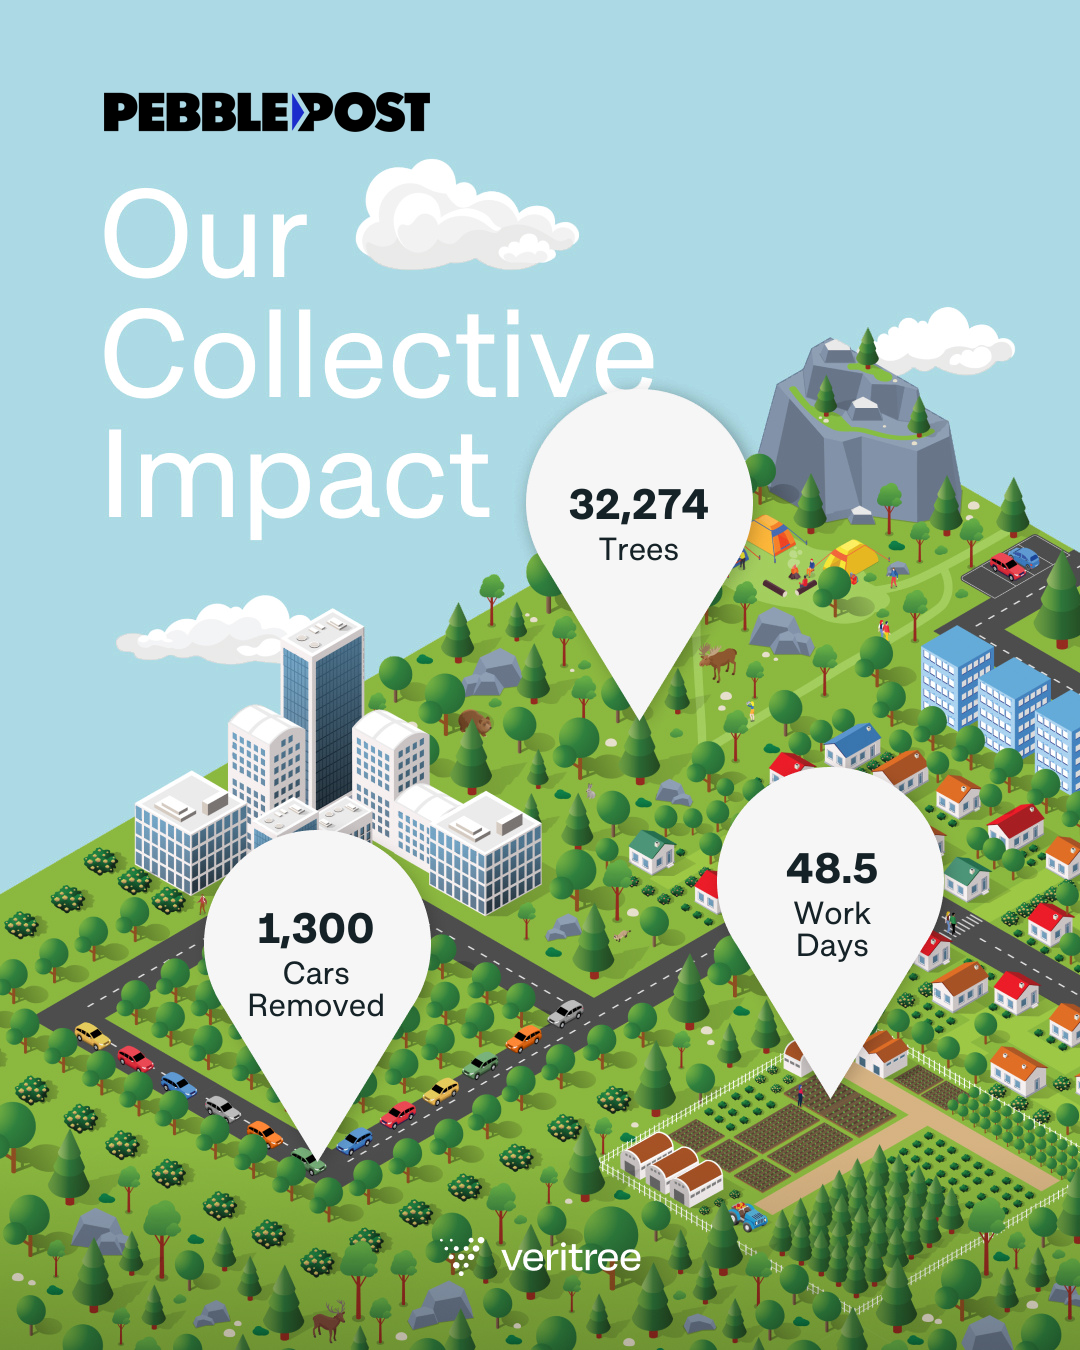 Image of impact stats on cityscape 